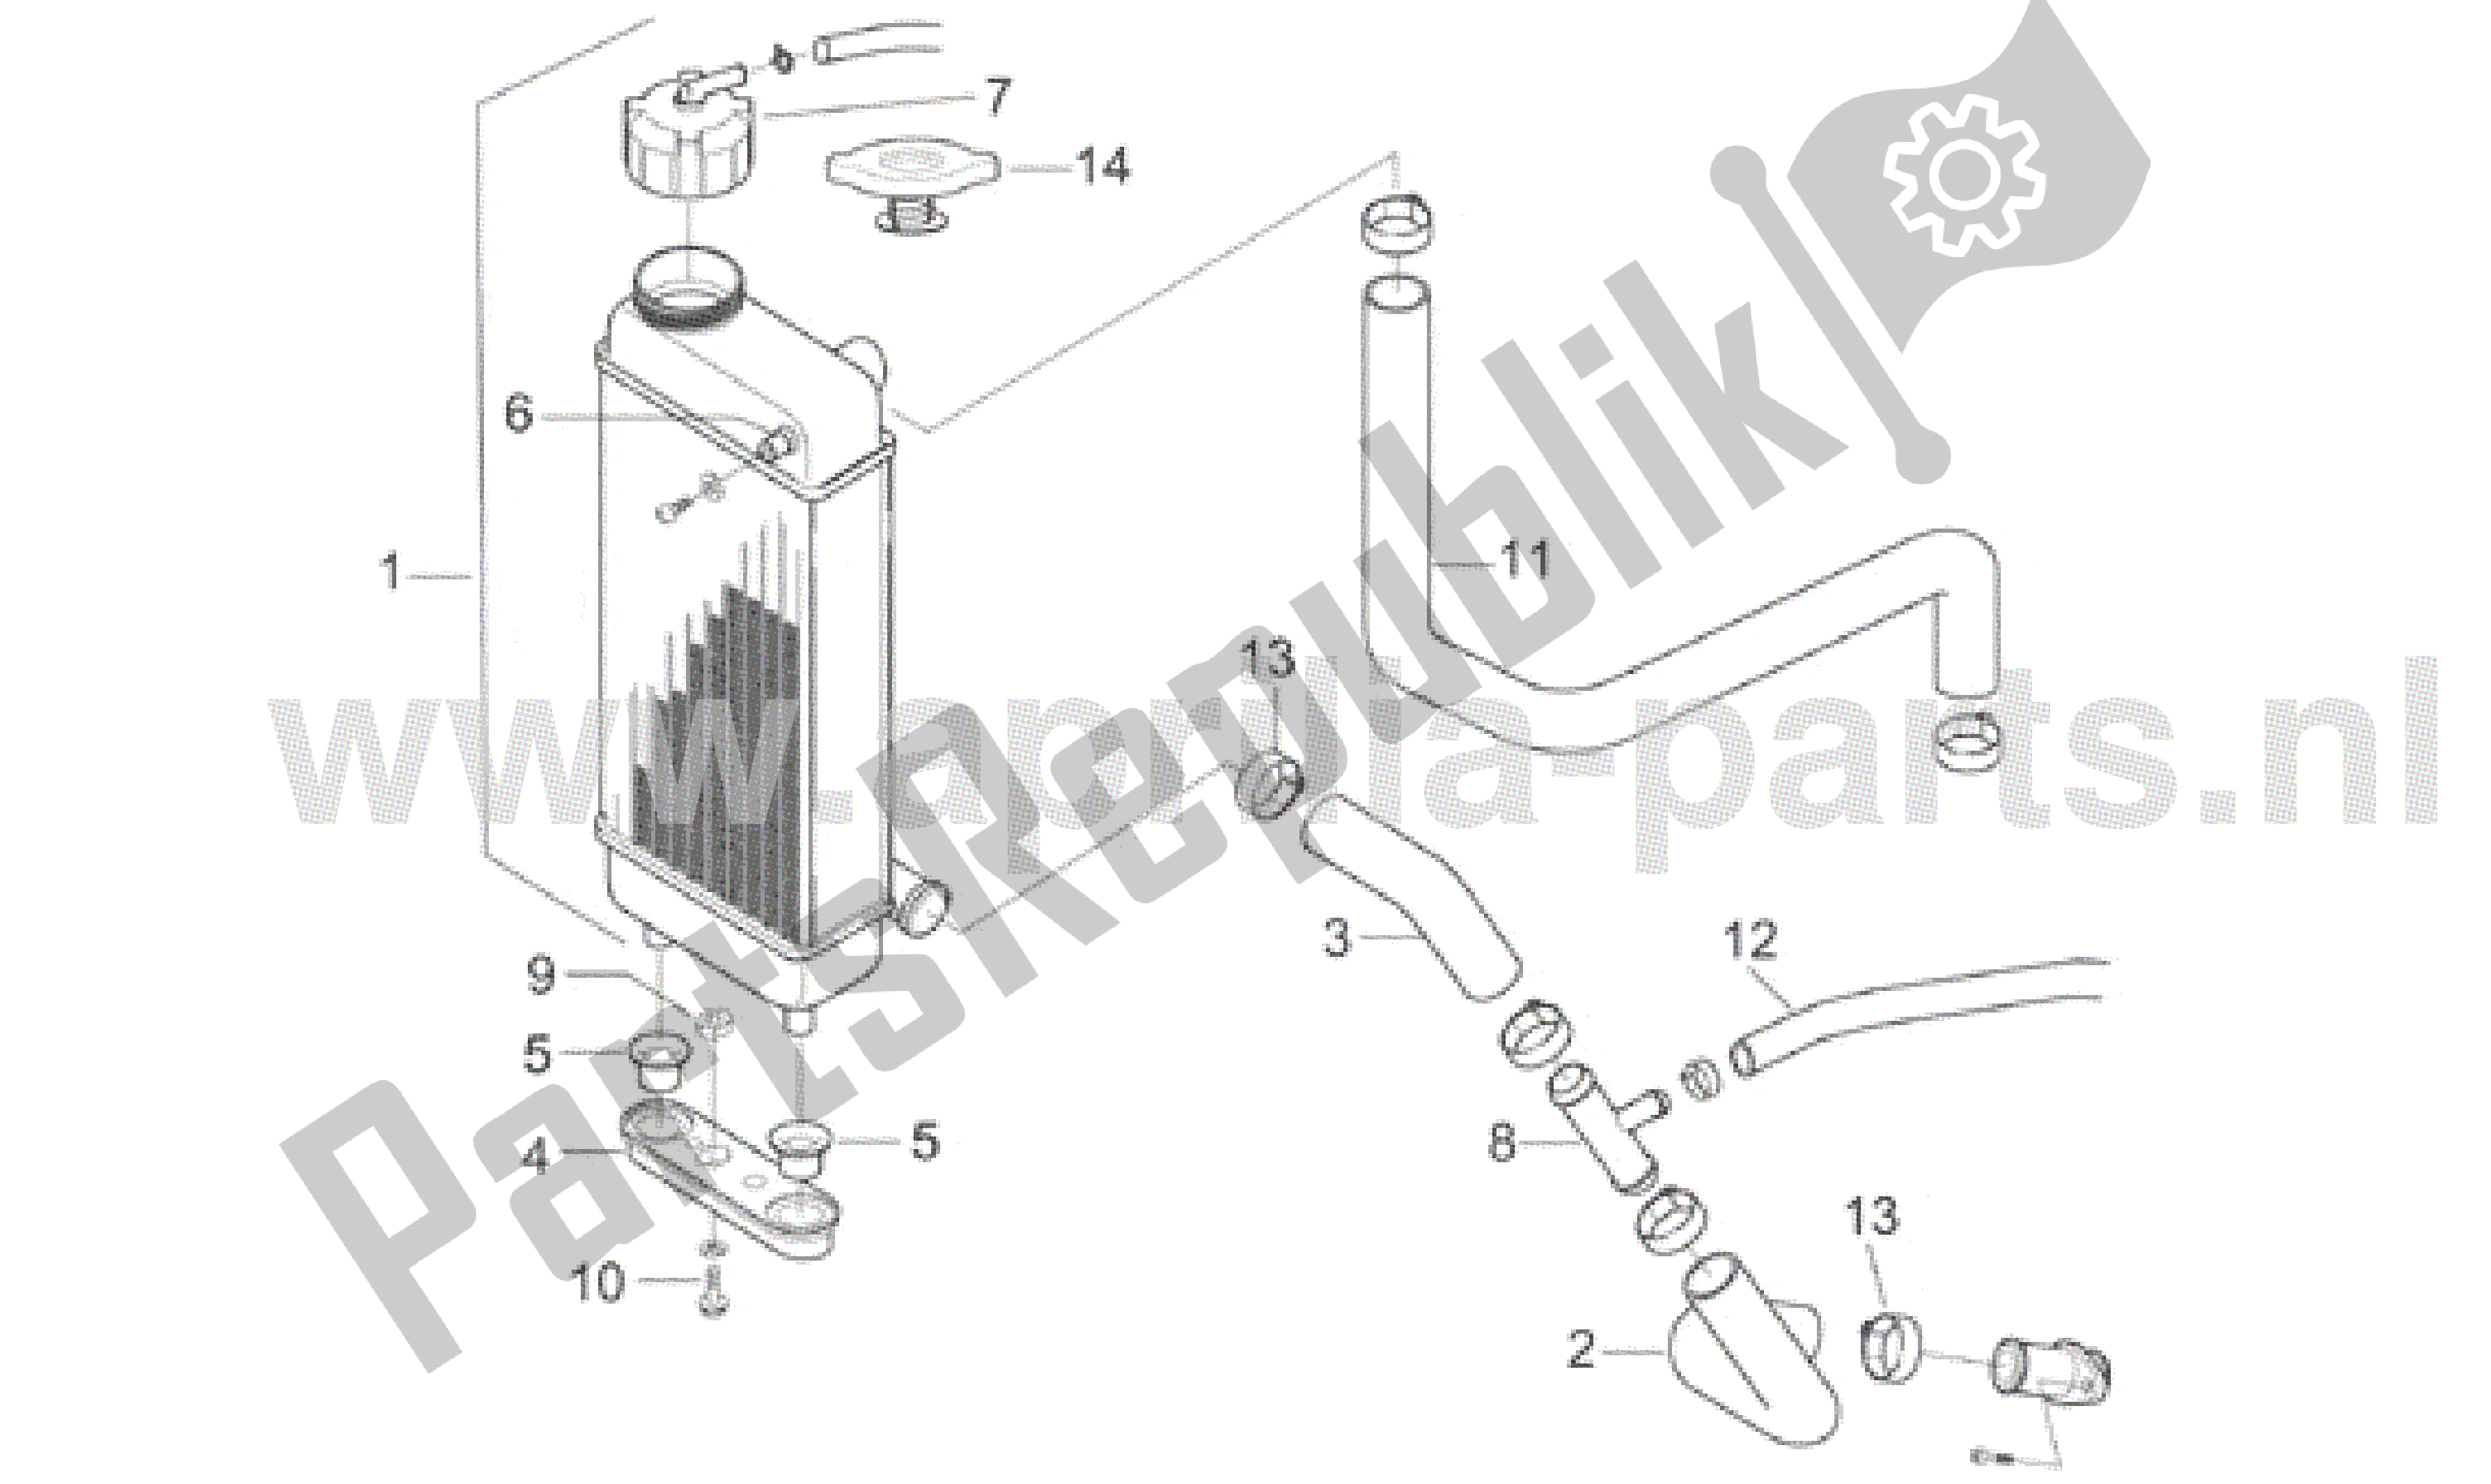 All parts for the Water Cooler of the Aprilia RX 50 1995 - 2000